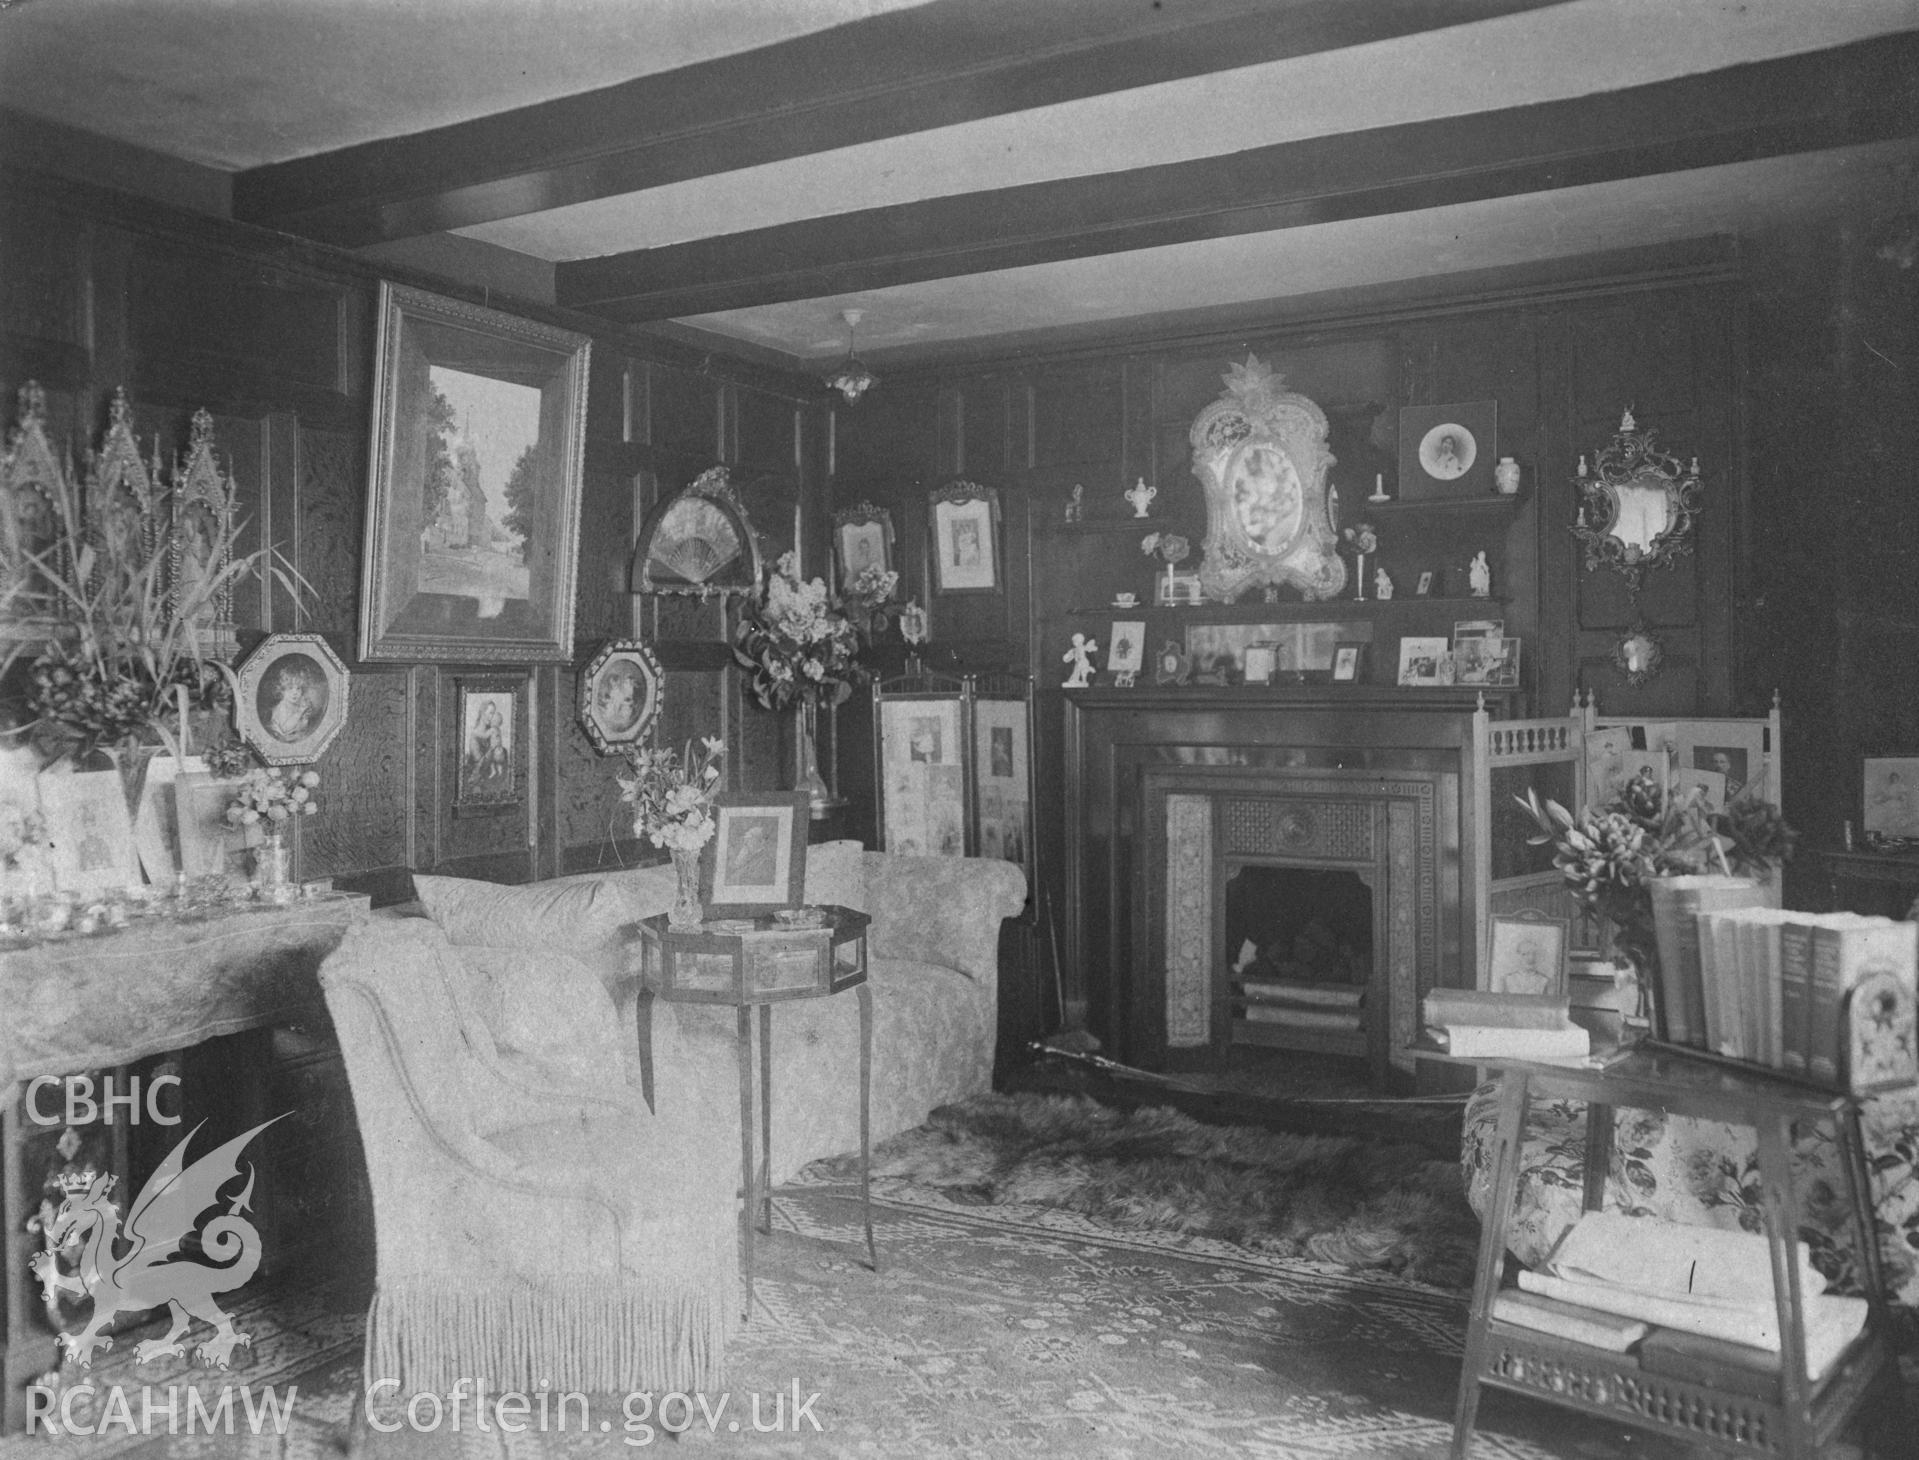 Digital copy of a black and white photograph showing interior view of an unidentified house possibly Plas Derwen, circa 1902.